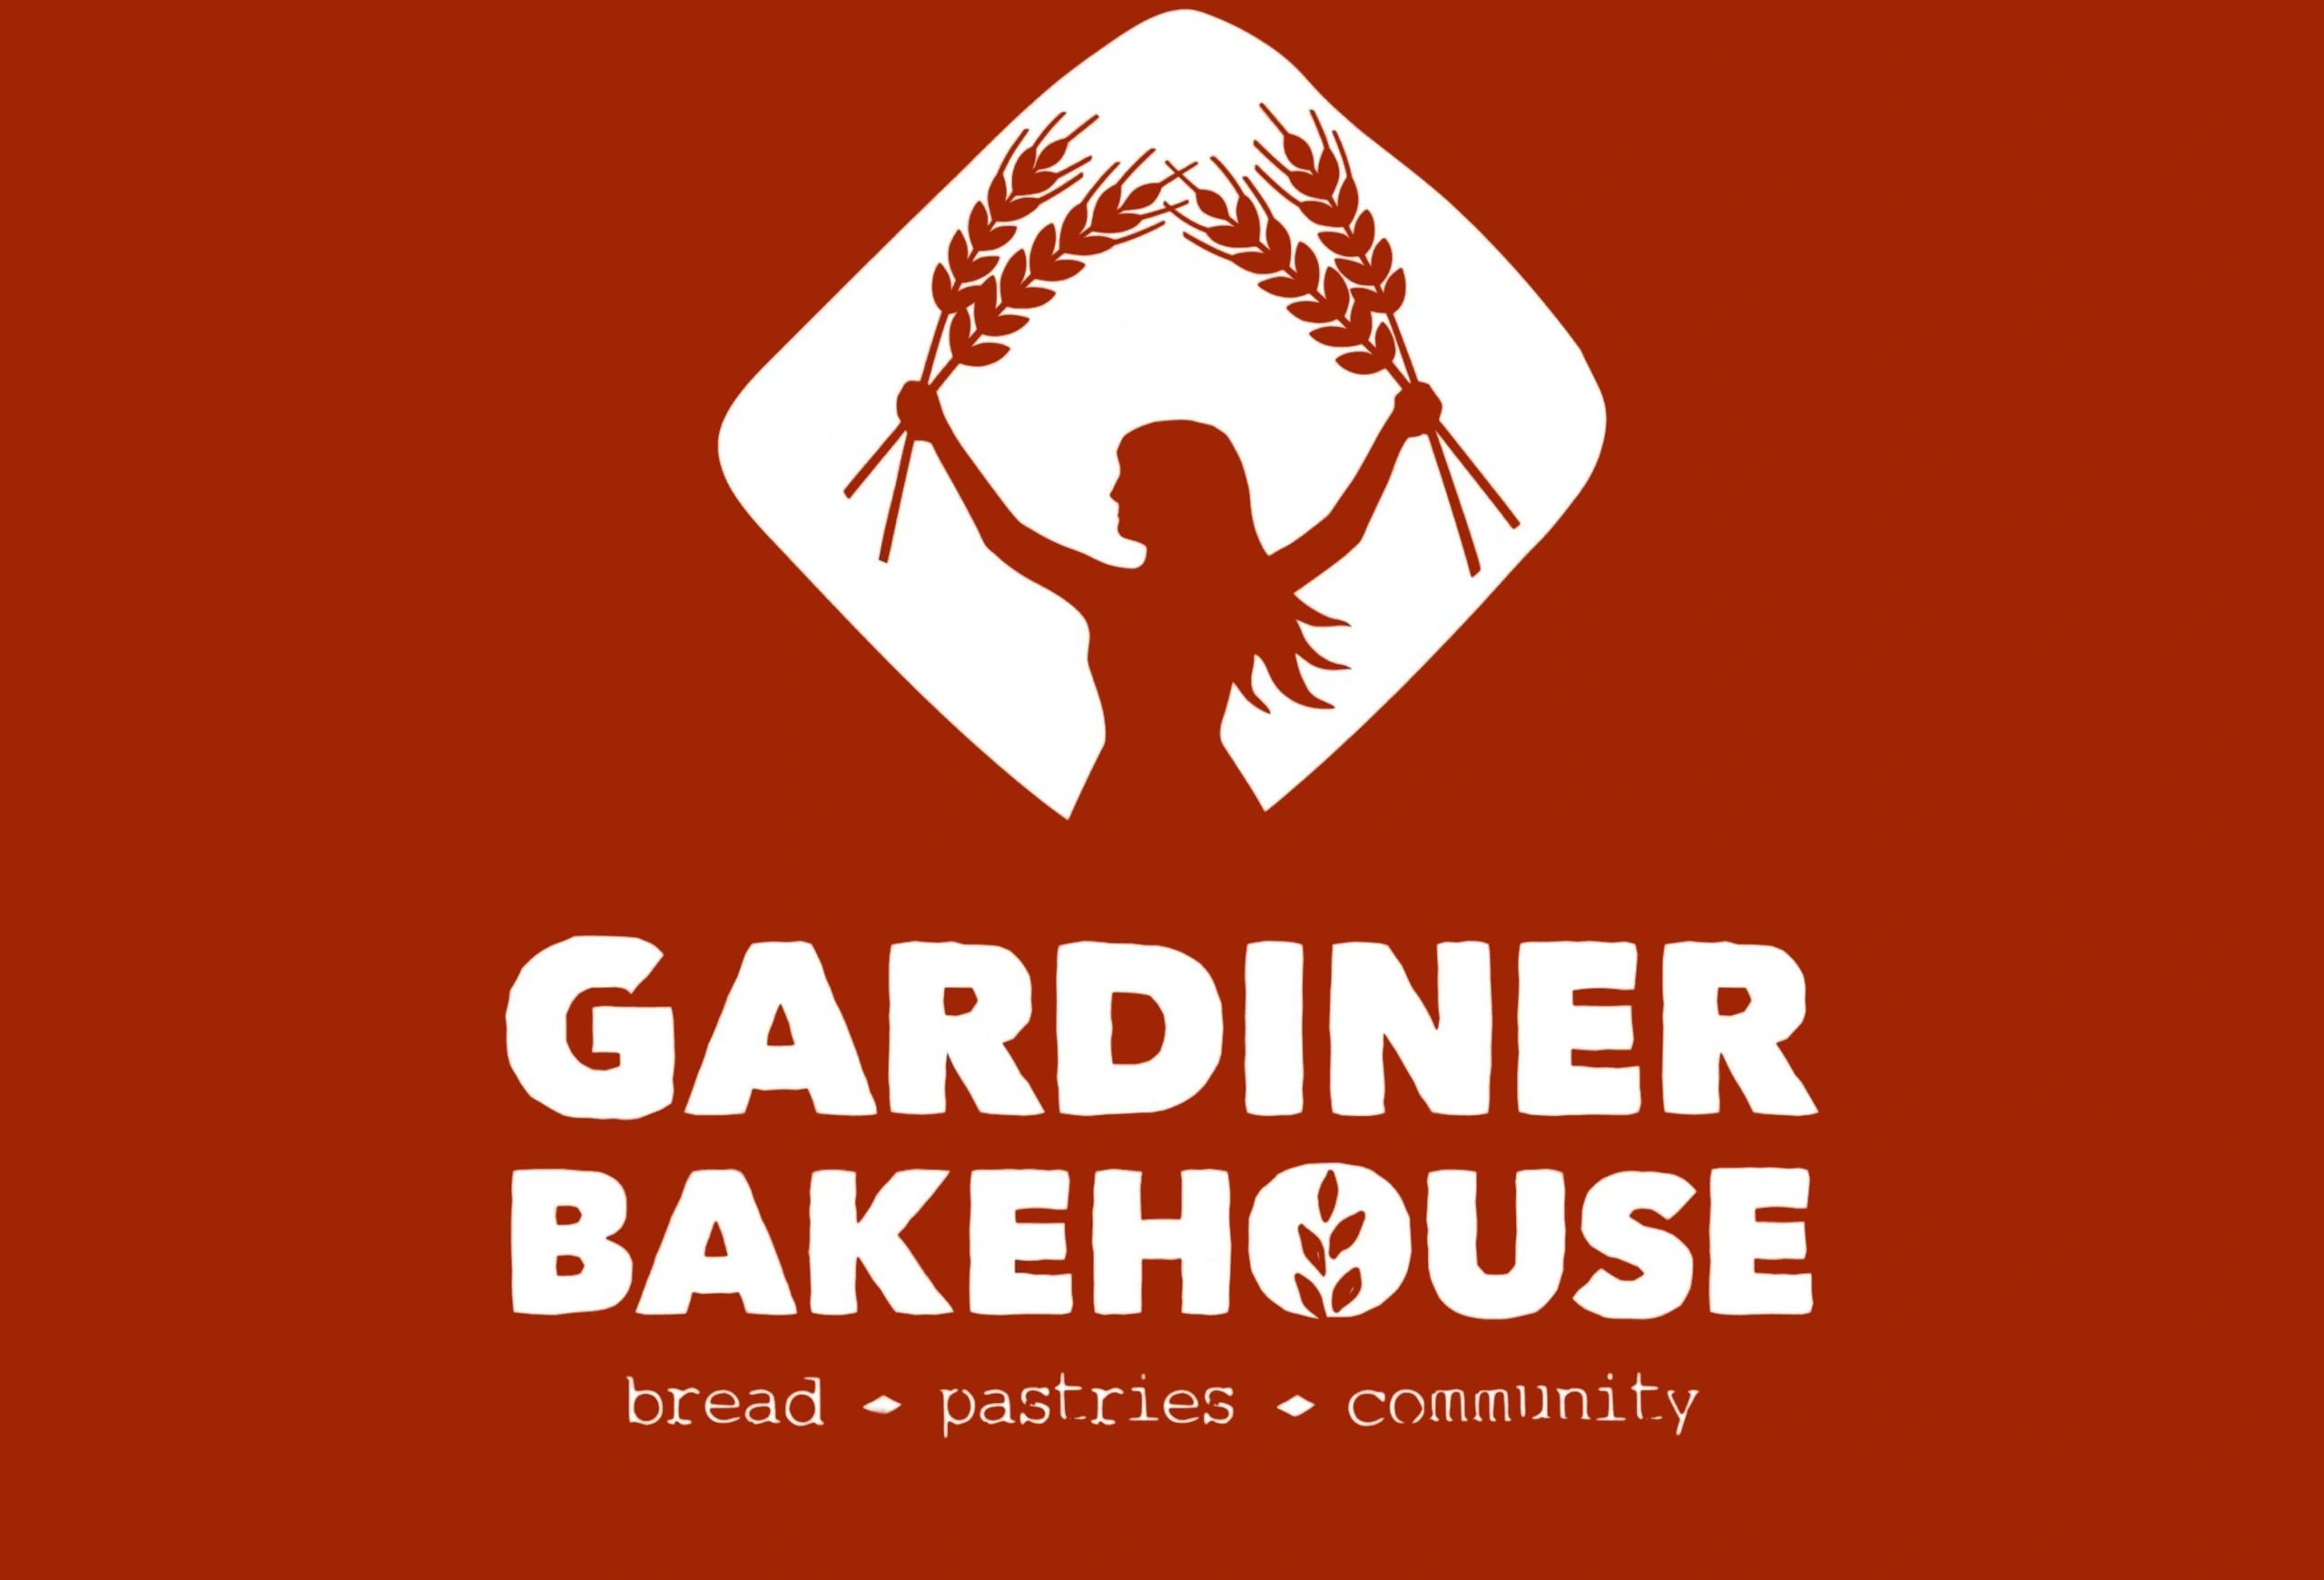 Gardiner Bakehouse logo: the silhouette of a woman holding stalks of wheat above her head.